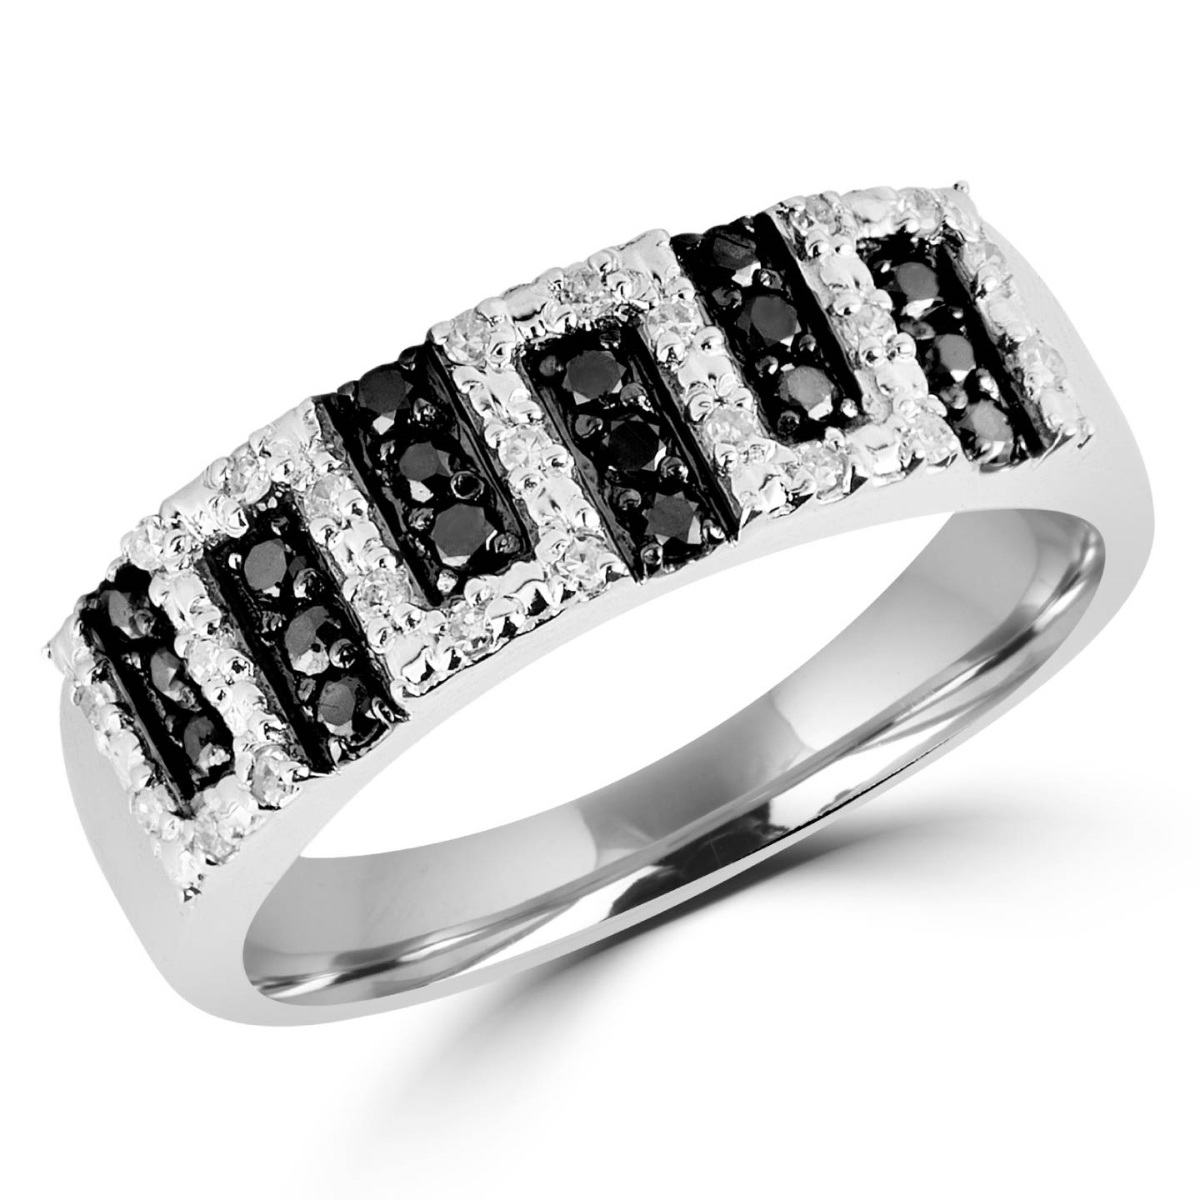 Picture of Majesty Diamonds MDR140087-8.75 0.25 CTW Black & White Diamond Fashion Cocktail Band Ring in 14K White Gold - Size 8.75